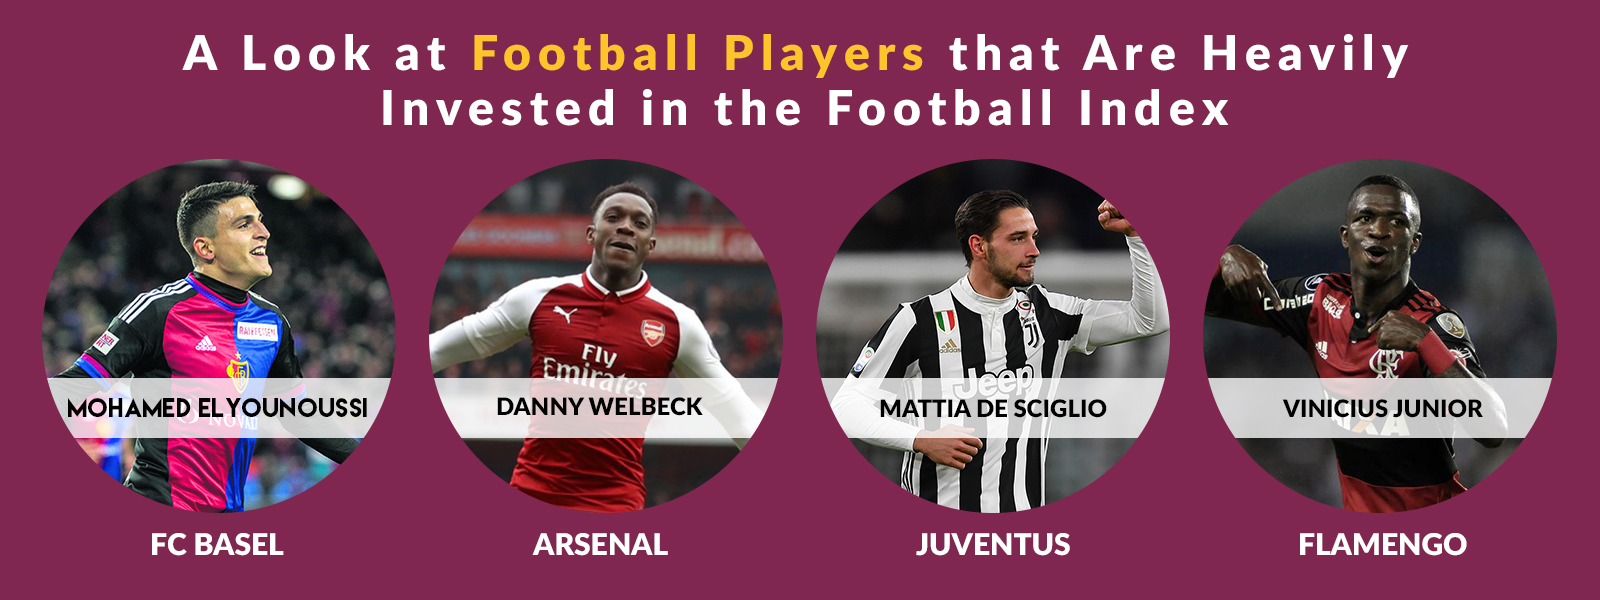 5 Footballers That Are Heavily Invested in the Football Index